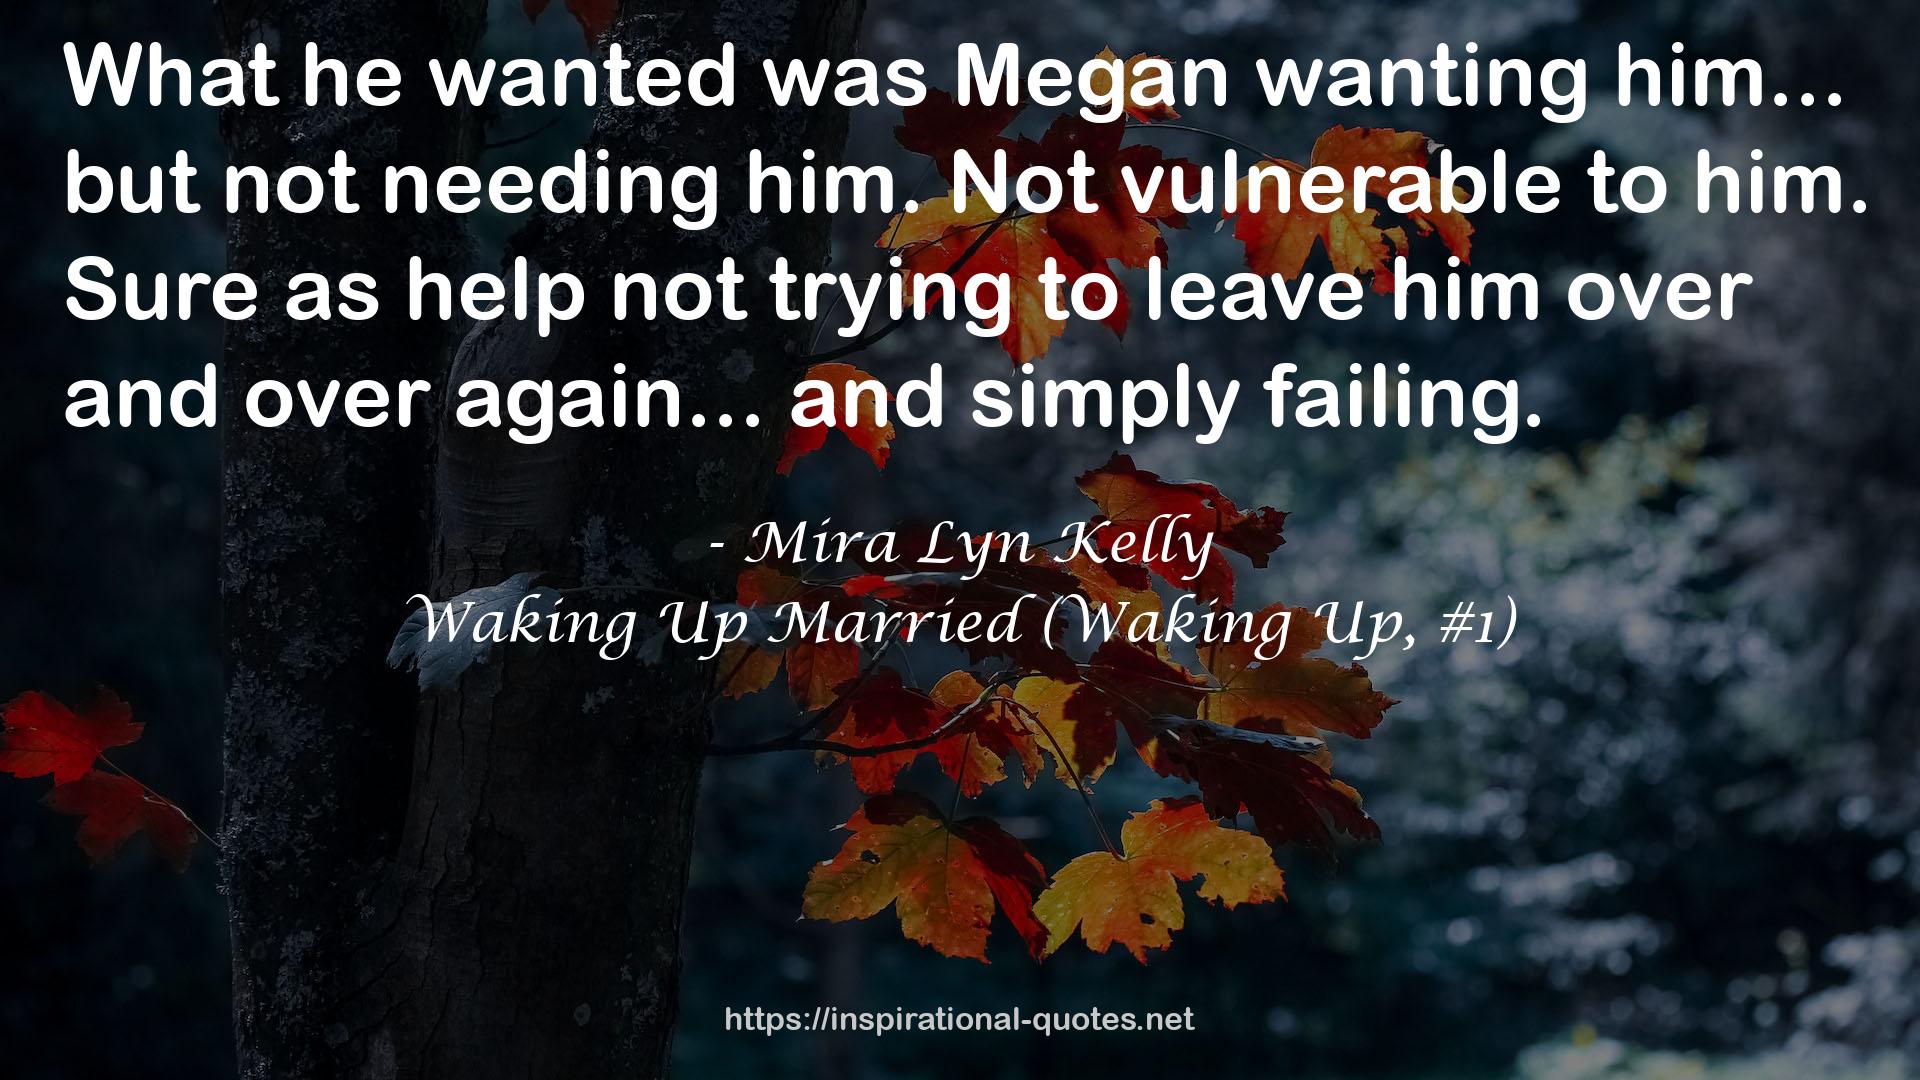 Waking Up Married (Waking Up, #1) QUOTES